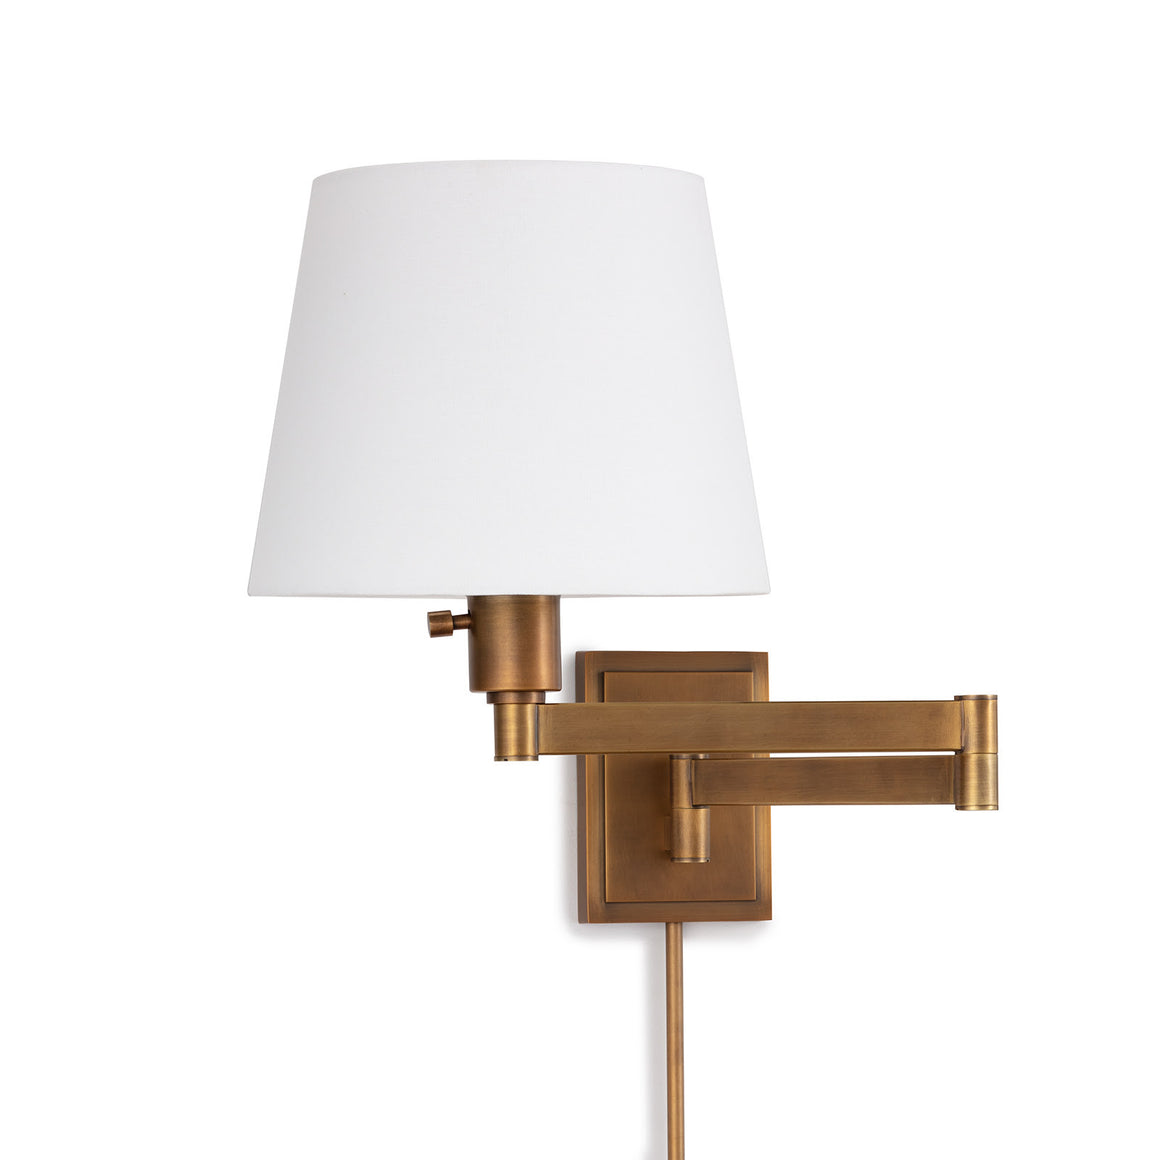 Southern Living Virtue Sconce Single - Natural Brass